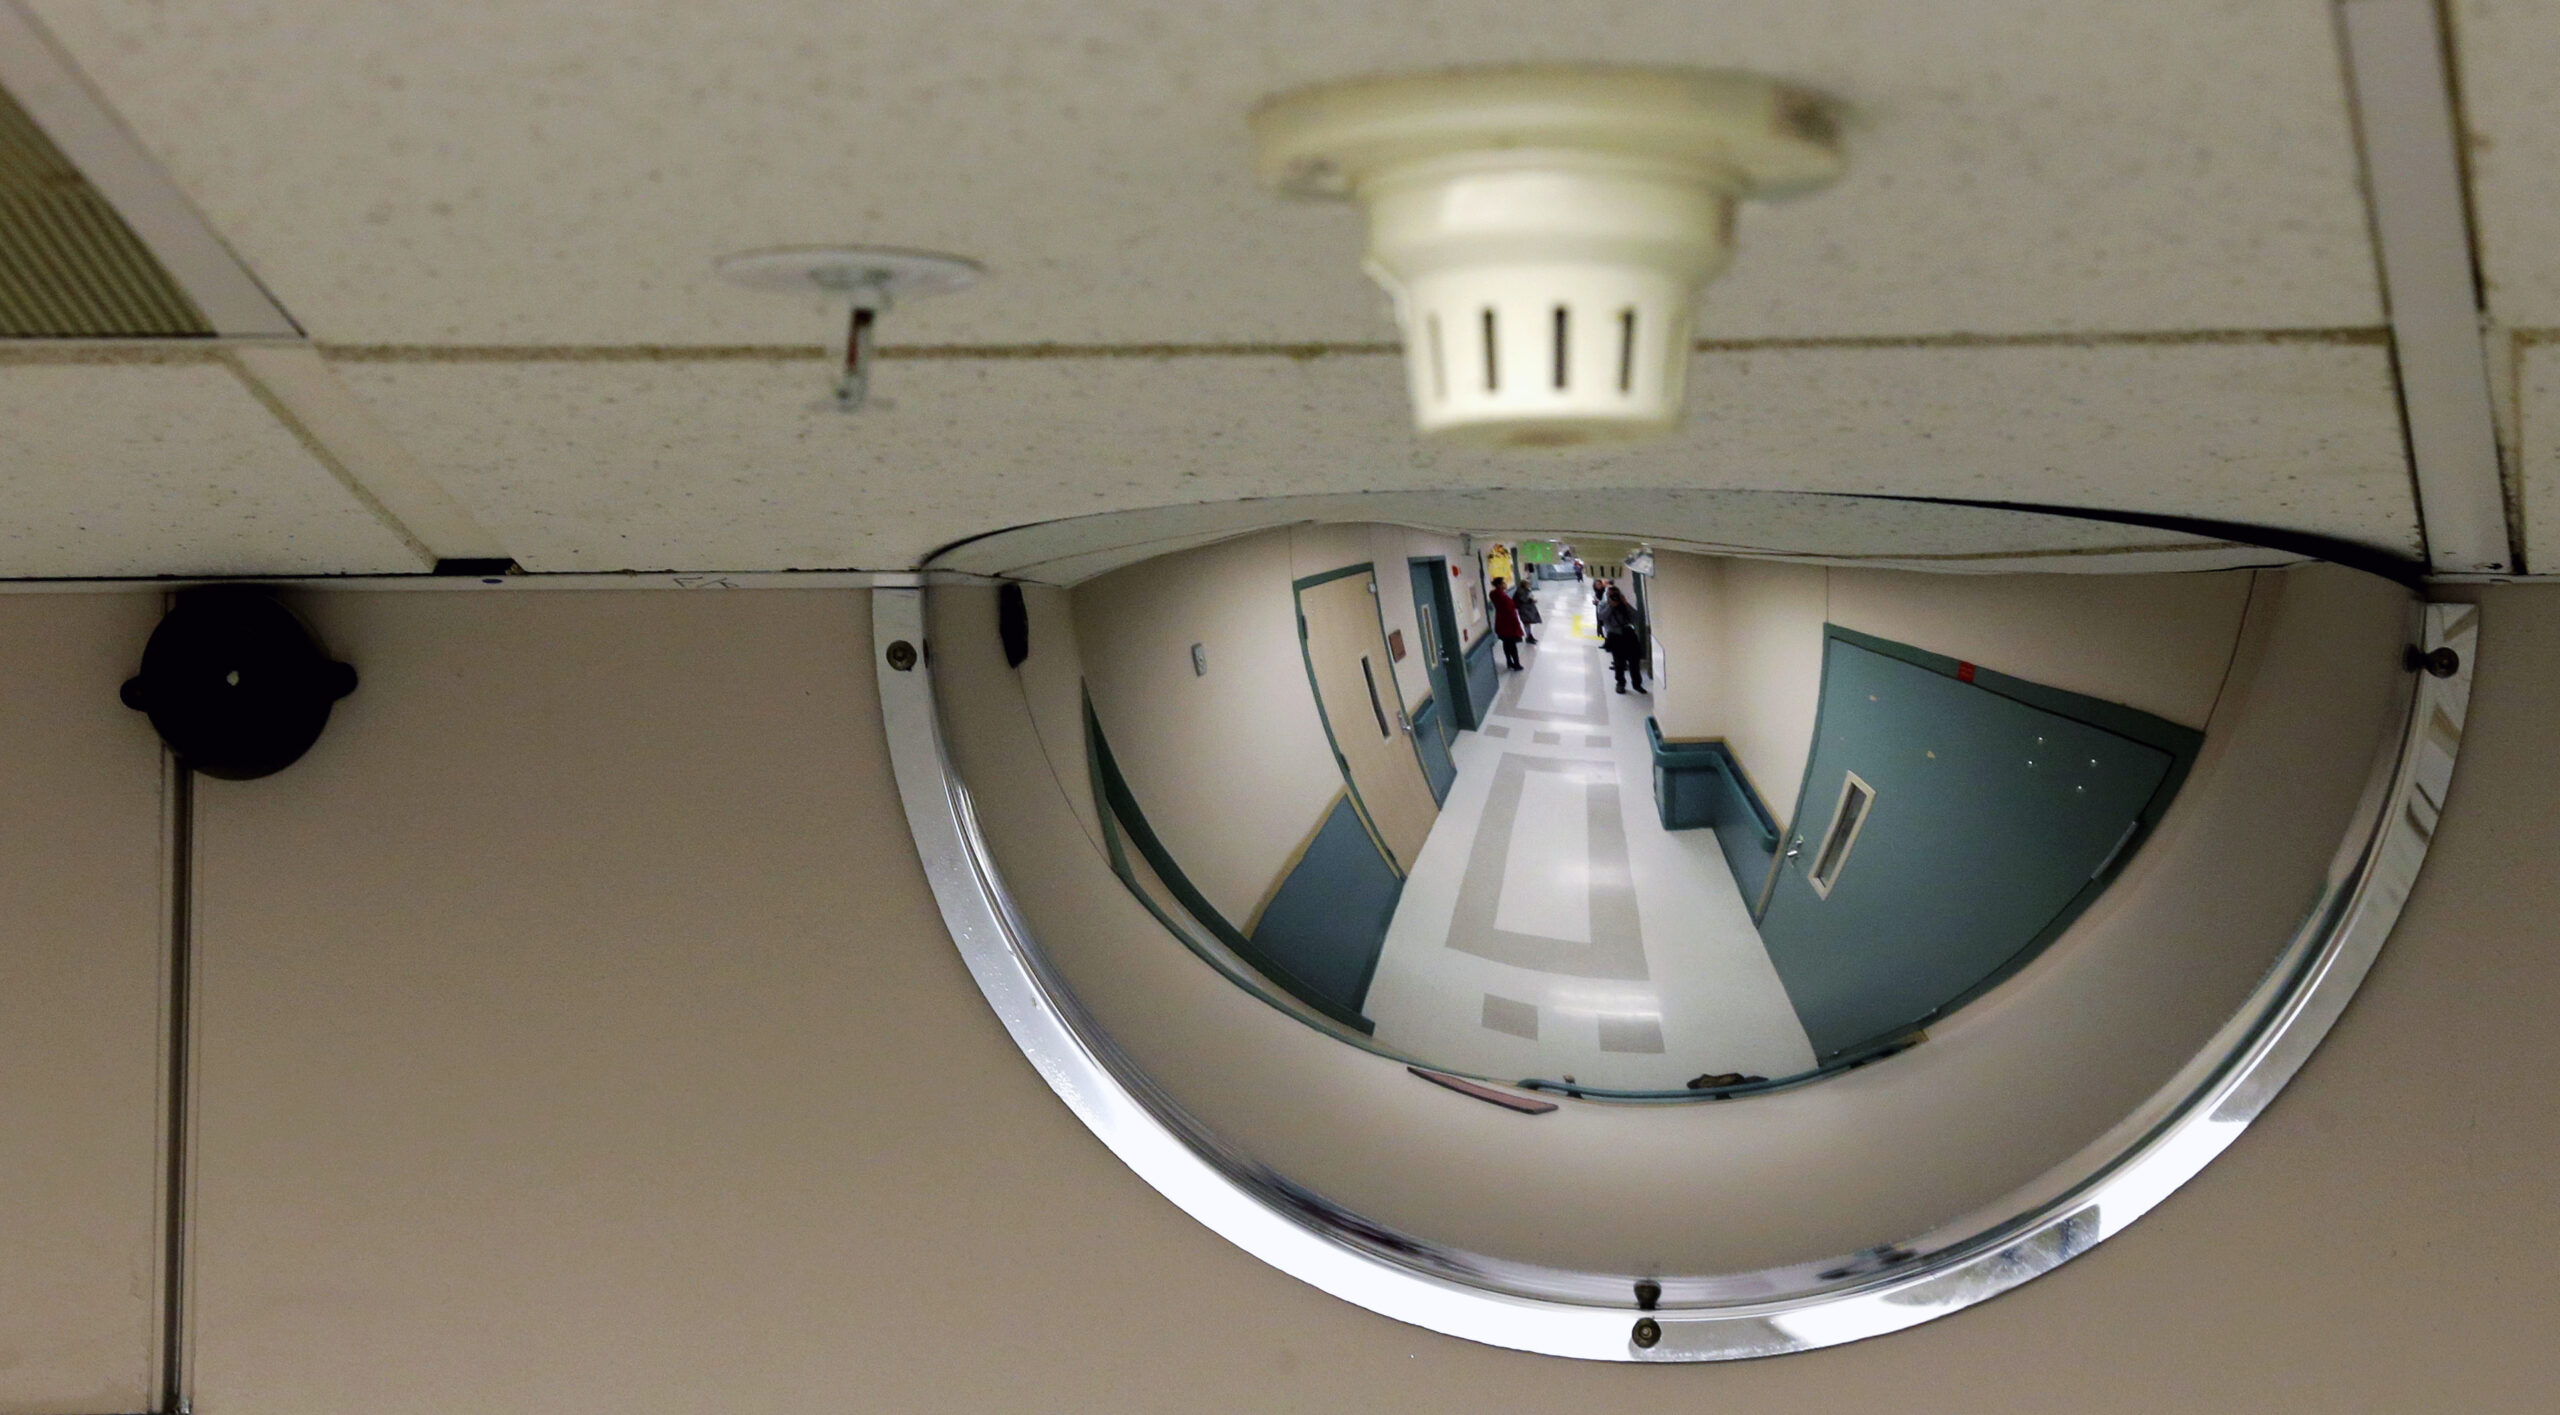 Camera on the ceiling in a hospital hallway